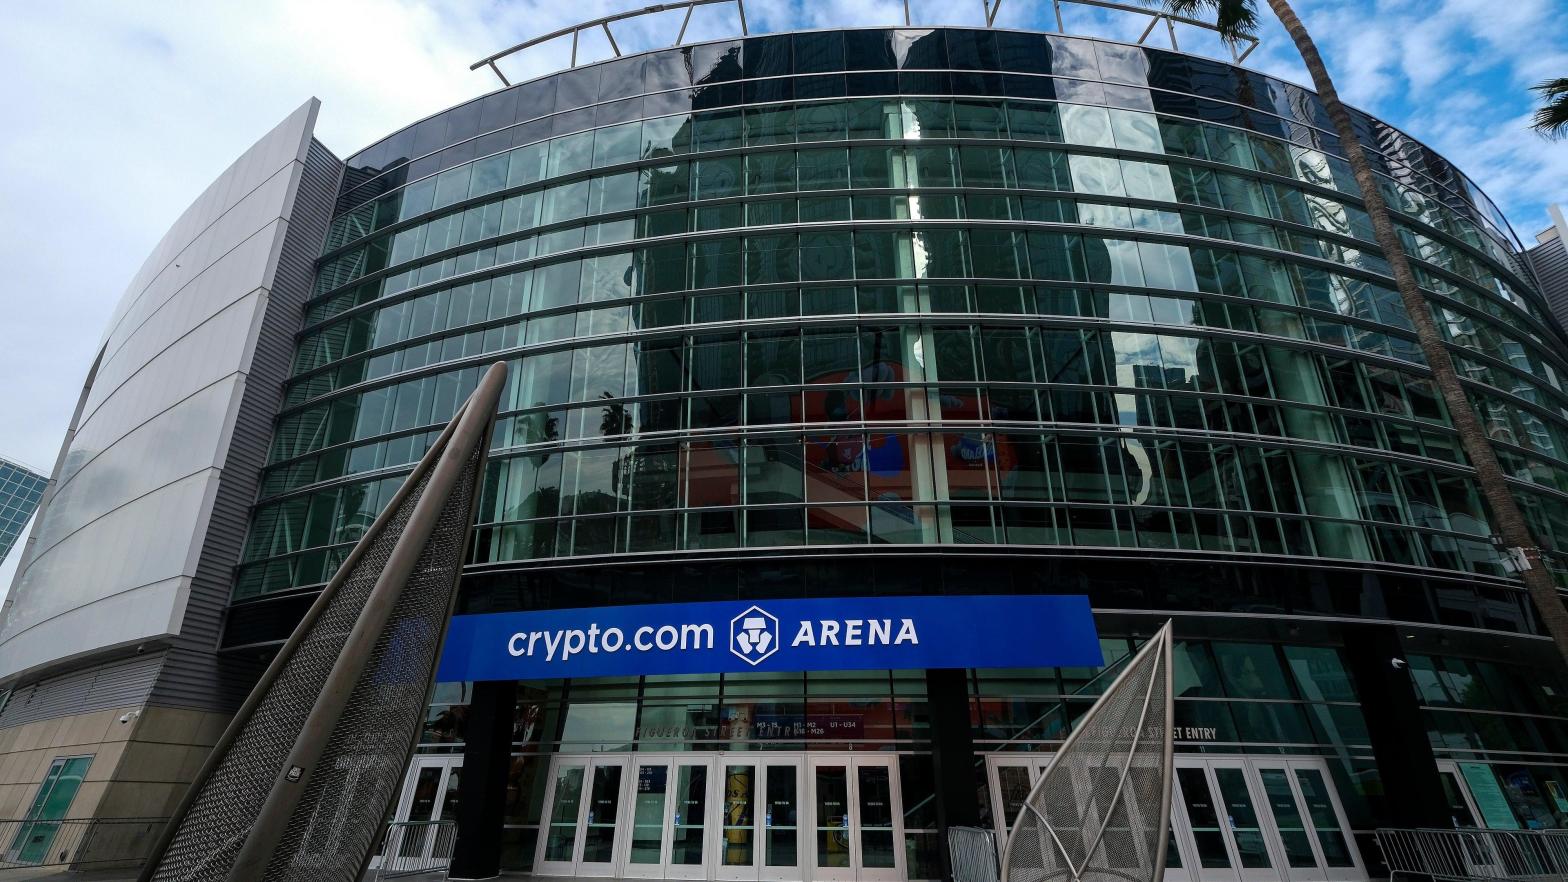 It's edging on a year since Crypto.com bought the naming rights to the stadium formerly called the LA Staples Centre. Now the company is scraping back its millions from wherever it can get it. (Photo: Ringo Chiu, Shutterstock)